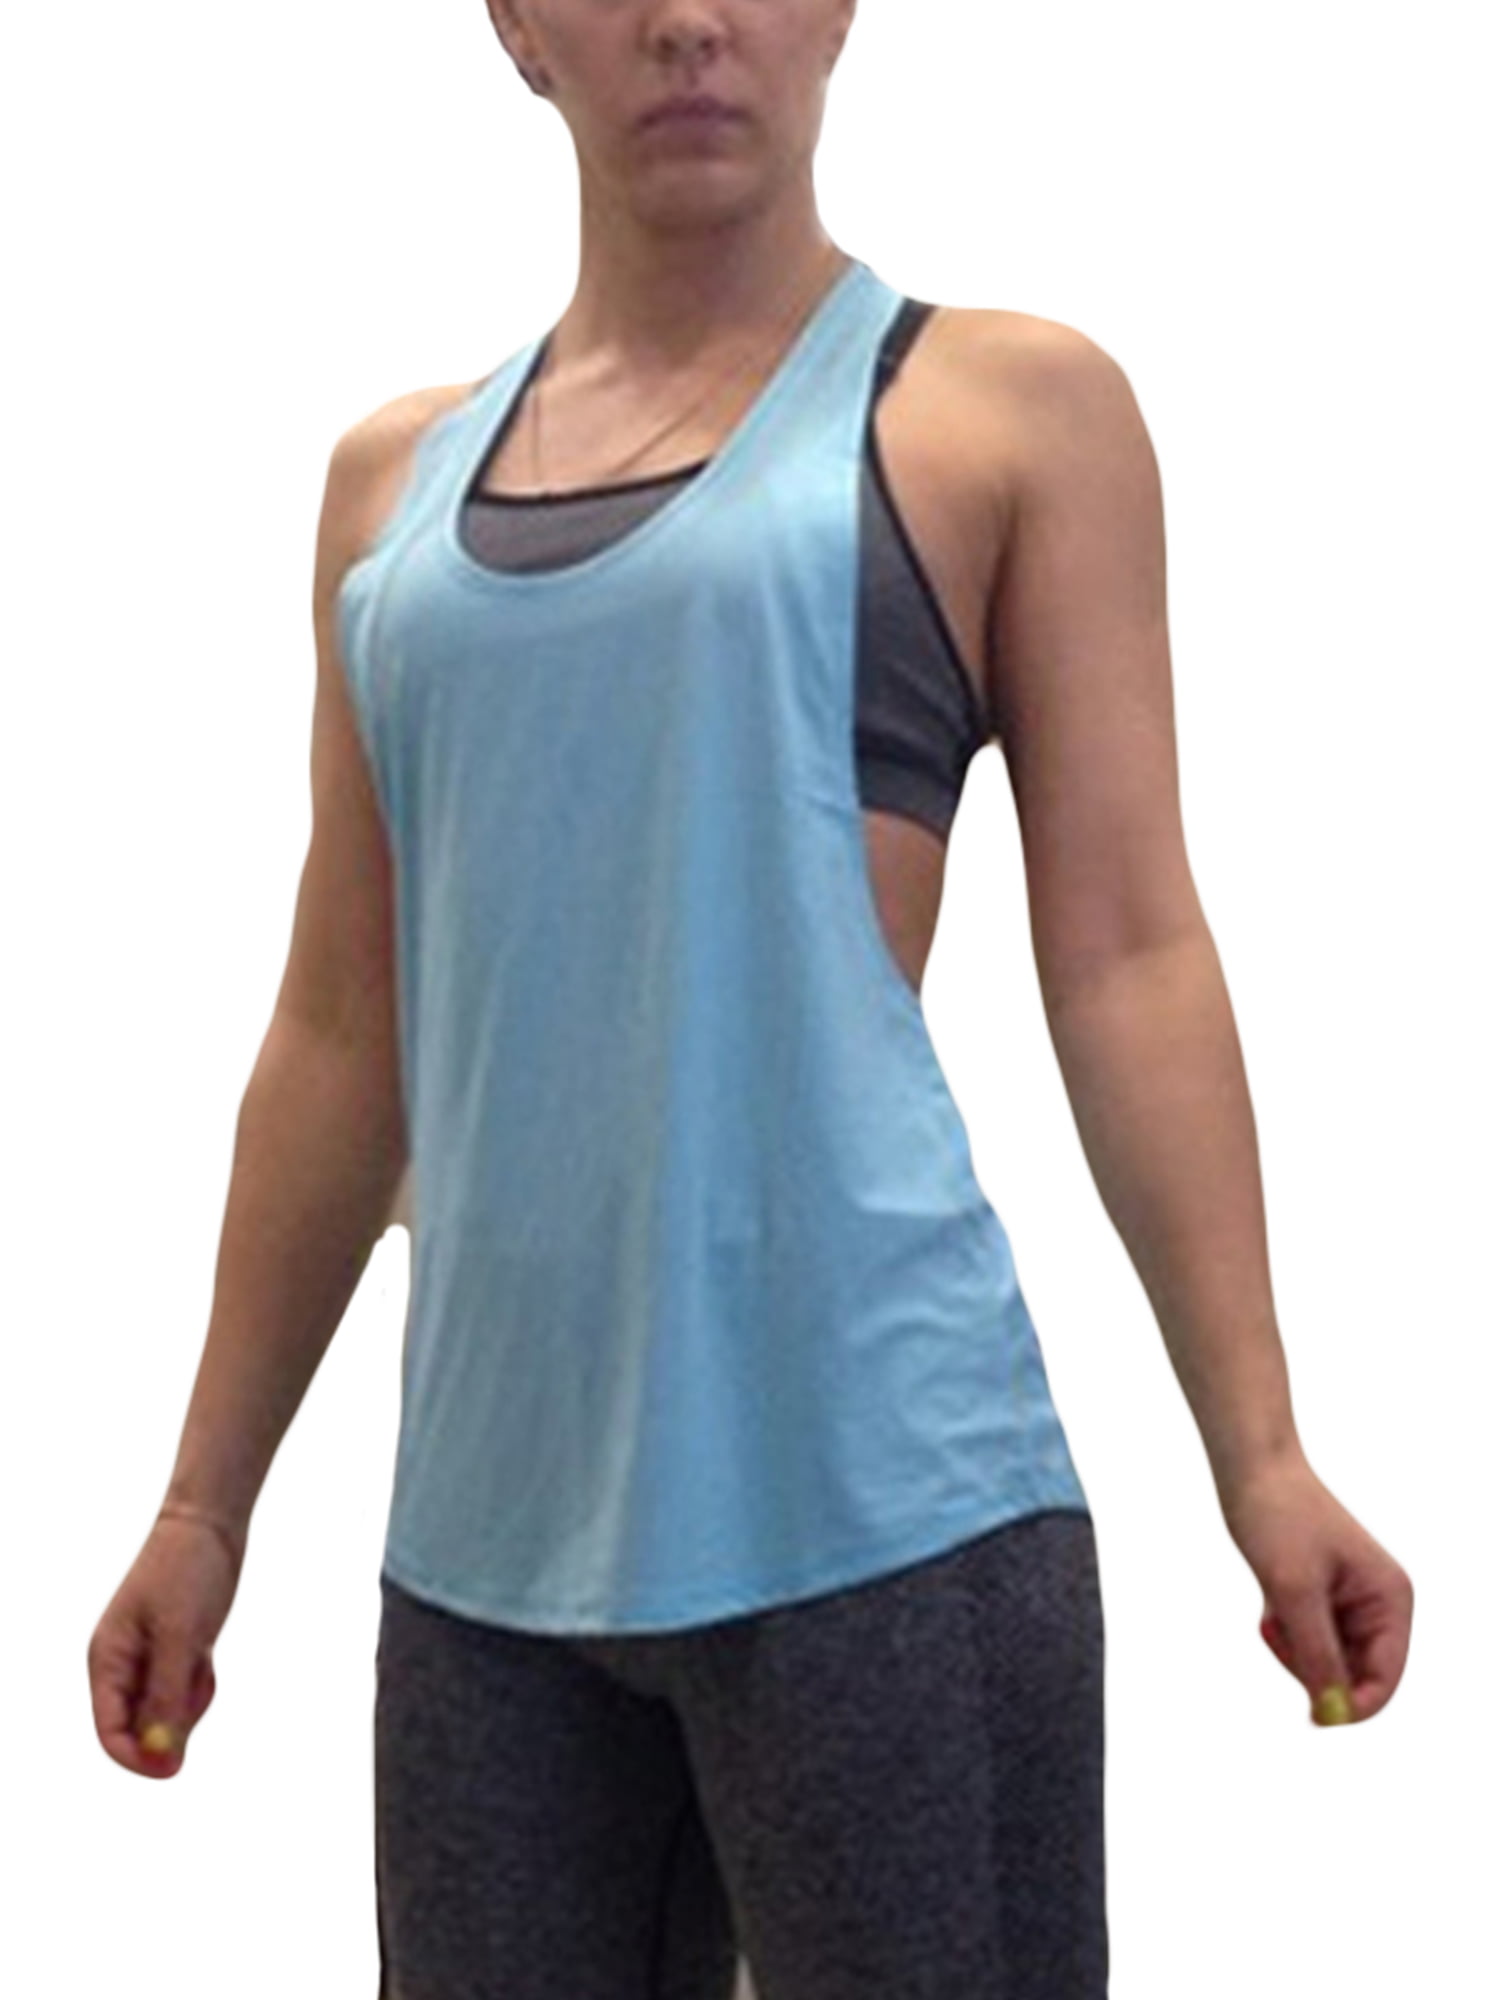 Ice Silk Workout Tops for Women Quick Dry Muscle Gym Running Shirts Sleeveless Flowy Yoga Tank Tops 